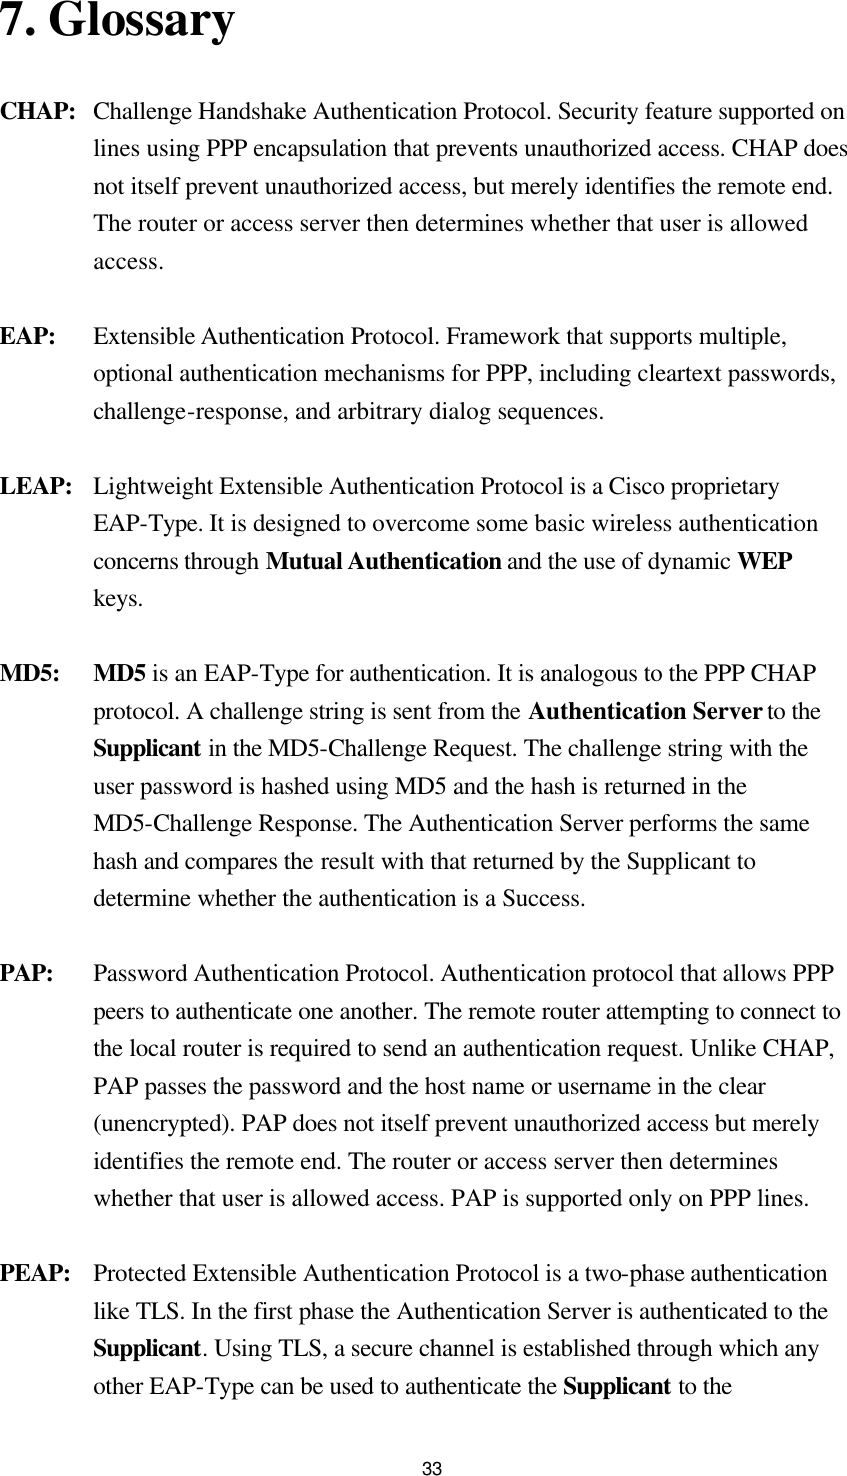  337. Glossary   CHAP: Challenge Handshake Authentication Protocol. Security feature supported on lines using PPP encapsulation that prevents unauthorized access. CHAP does not itself prevent unauthorized access, but merely identifies the remote end. The router or access server then determines whether that user is allowed access. EAP: Extensible Authentication Protocol. Framework that supports multiple, optional authentication mechanisms for PPP, including cleartext passwords, challenge-response, and arbitrary dialog sequences. LEAP: Lightweight Extensible Authentication Protocol is a Cisco proprietary EAP-Type. It is designed to overcome some basic wireless authentication concerns through Mutual Authentication and the use of dynamic WEP keys. MD5: MD5 is an EAP-Type for authentication. It is analogous to the PPP CHAP protocol. A challenge string is sent from the Authentication Server to the Supplicant in the MD5-Challenge Request. The challenge string with the user password is hashed using MD5 and the hash is returned in the MD5-Challenge Response. The Authentication Server performs the same hash and compares the result with that returned by the Supplicant to determine whether the authentication is a Success. PAP: Password Authentication Protocol. Authentication protocol that allows PPP peers to authenticate one another. The remote router attempting to connect to the local router is required to send an authentication request. Unlike CHAP, PAP passes the password and the host name or username in the clear (unencrypted). PAP does not itself prevent unauthorized access but merely identifies the remote end. The router or access server then determines whether that user is allowed access. PAP is supported only on PPP lines. PEAP: Protected Extensible Authentication Protocol is a two-phase authentication like TLS. In the first phase the Authentication Server is authenticated to the Supplicant. Using TLS, a secure channel is established through which any other EAP-Type can be used to authenticate the Supplicant to the 